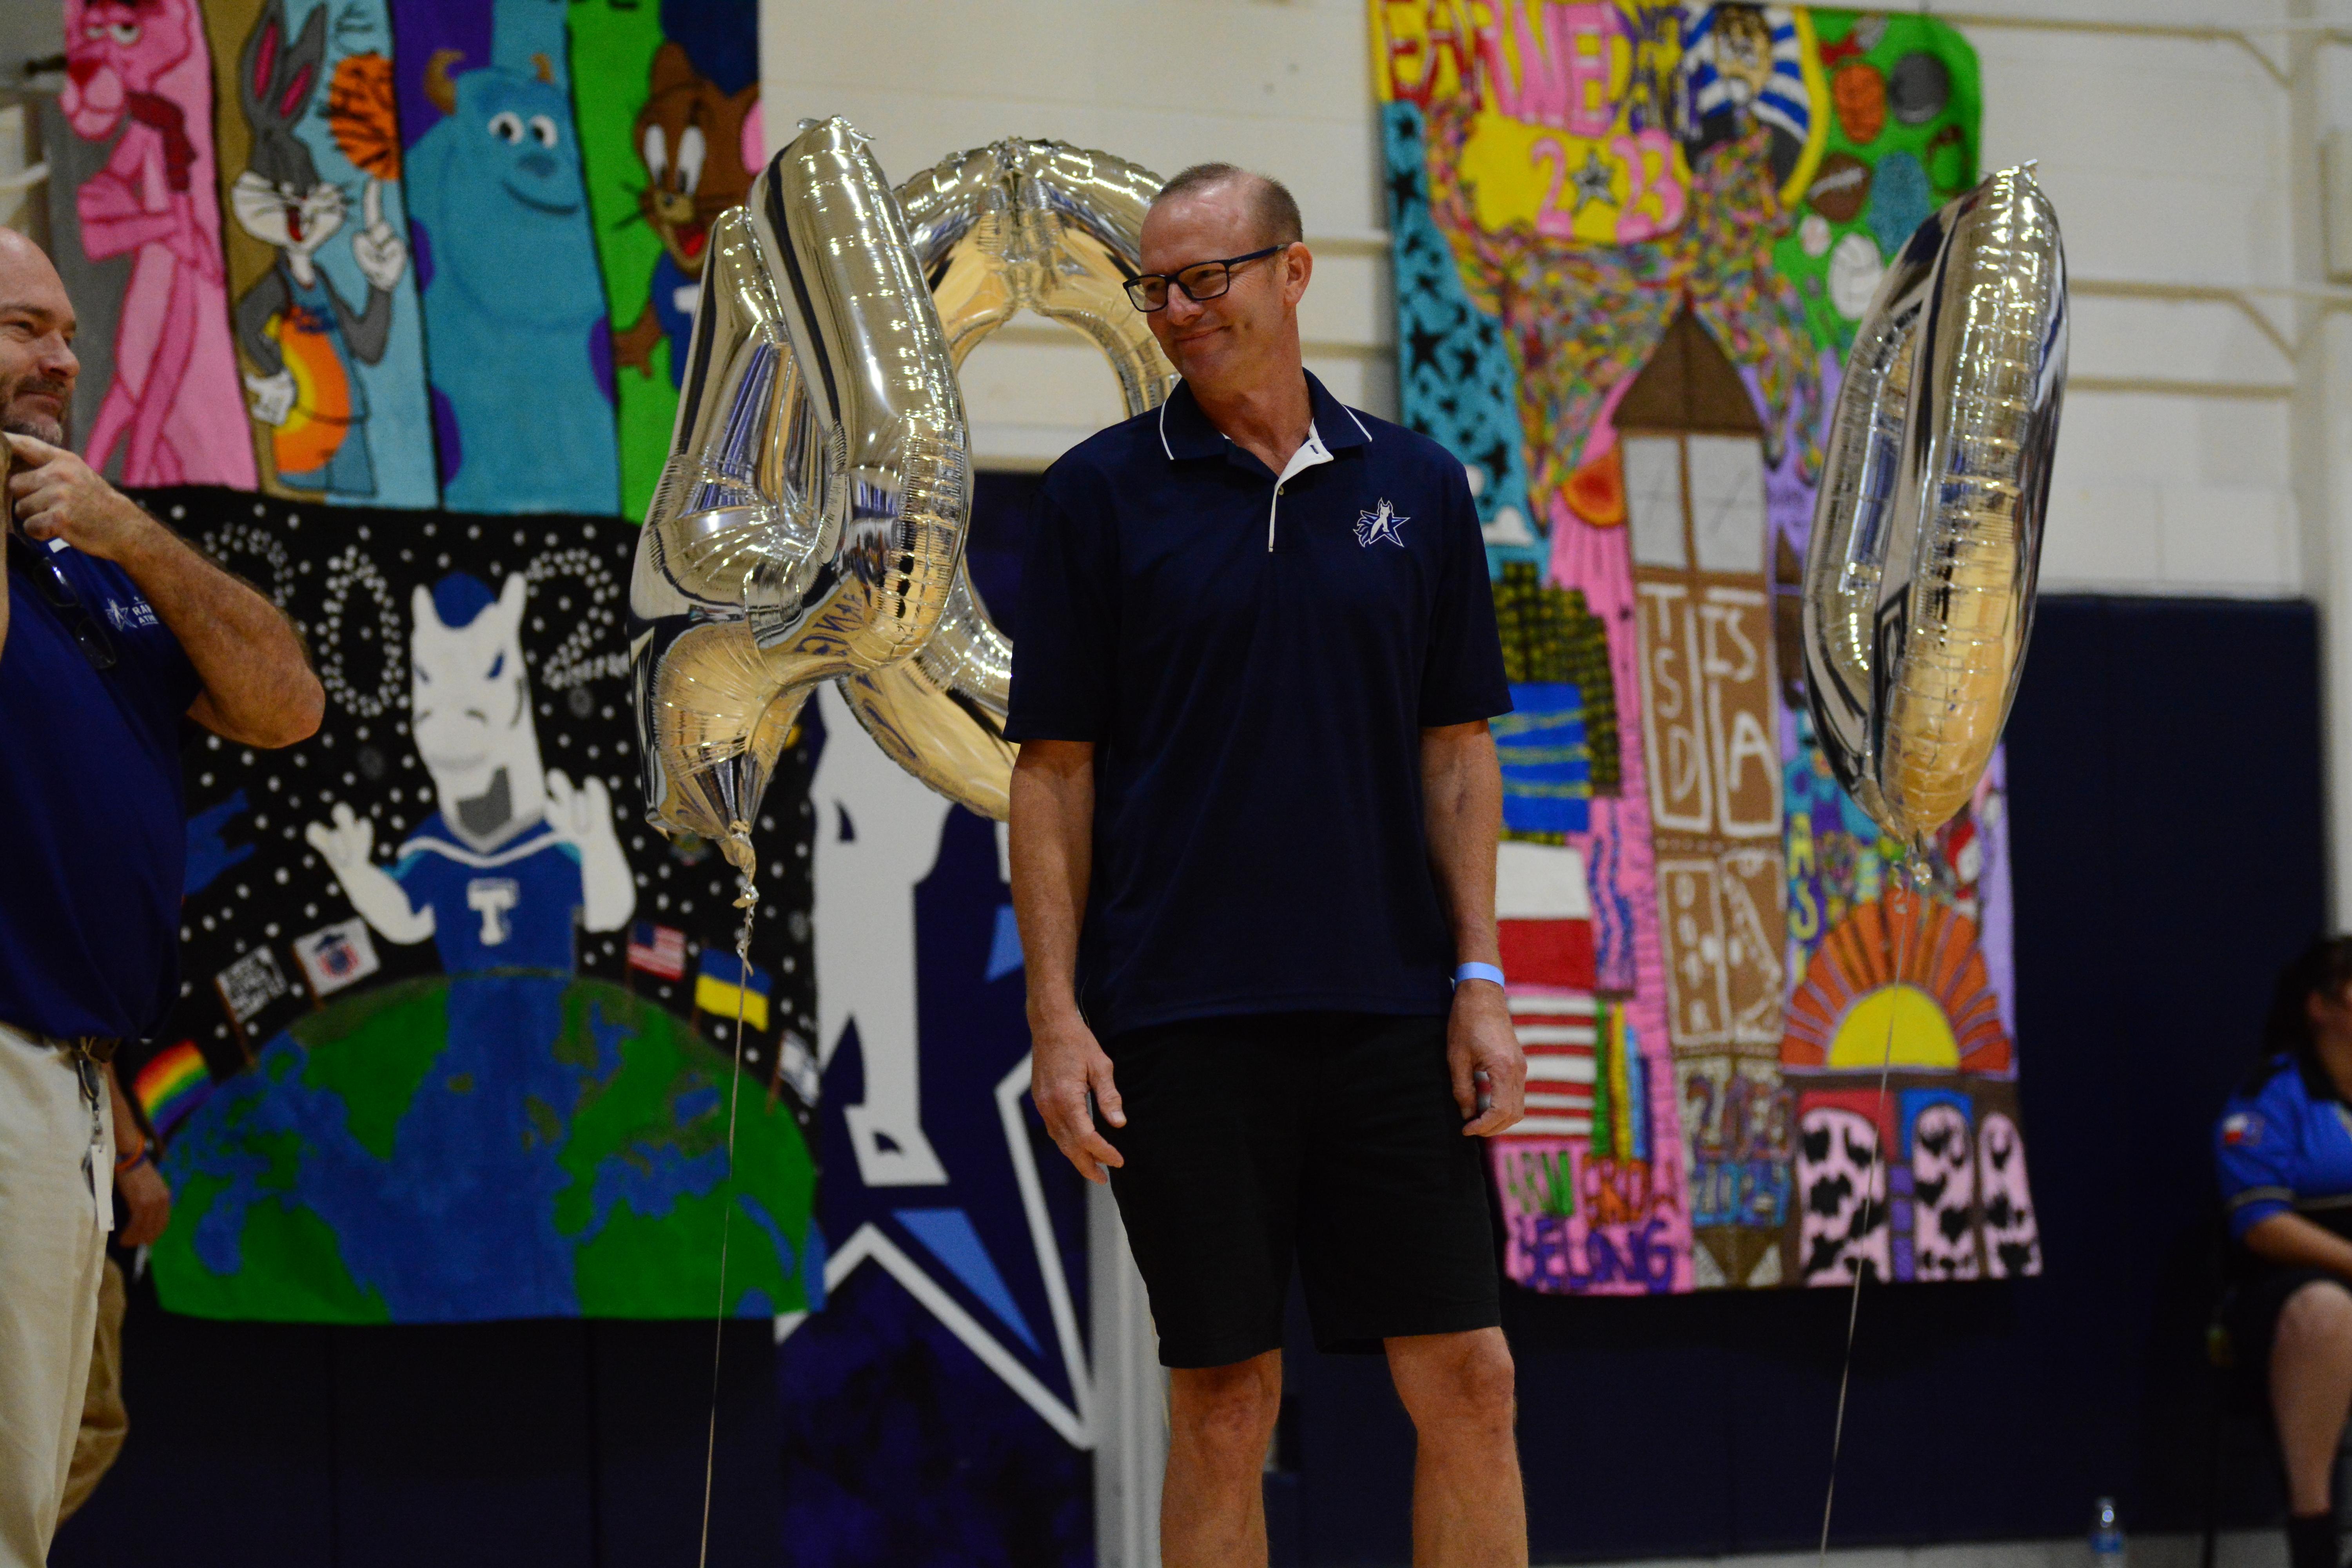 RJ Kaufman is smiling to Chris Hamilton in navy blue polo shirt. The background has three silver balloons that shapes 400.